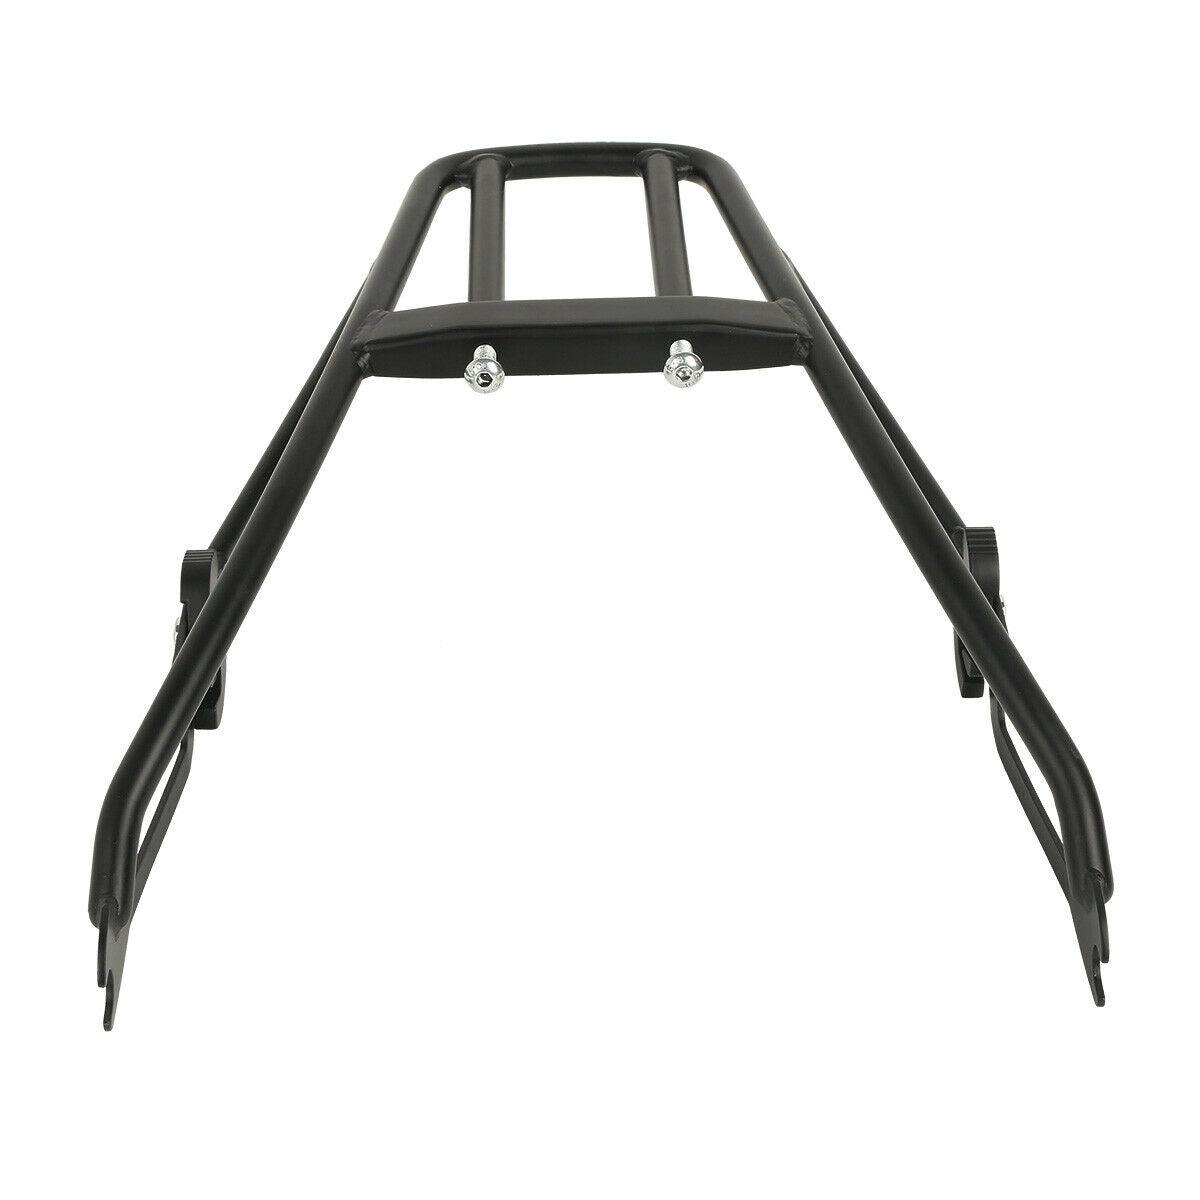 Detachable Luggage Rack Fit For Harley Street 500 750 XG500 750 2015-2021 Black - Moto Life Products